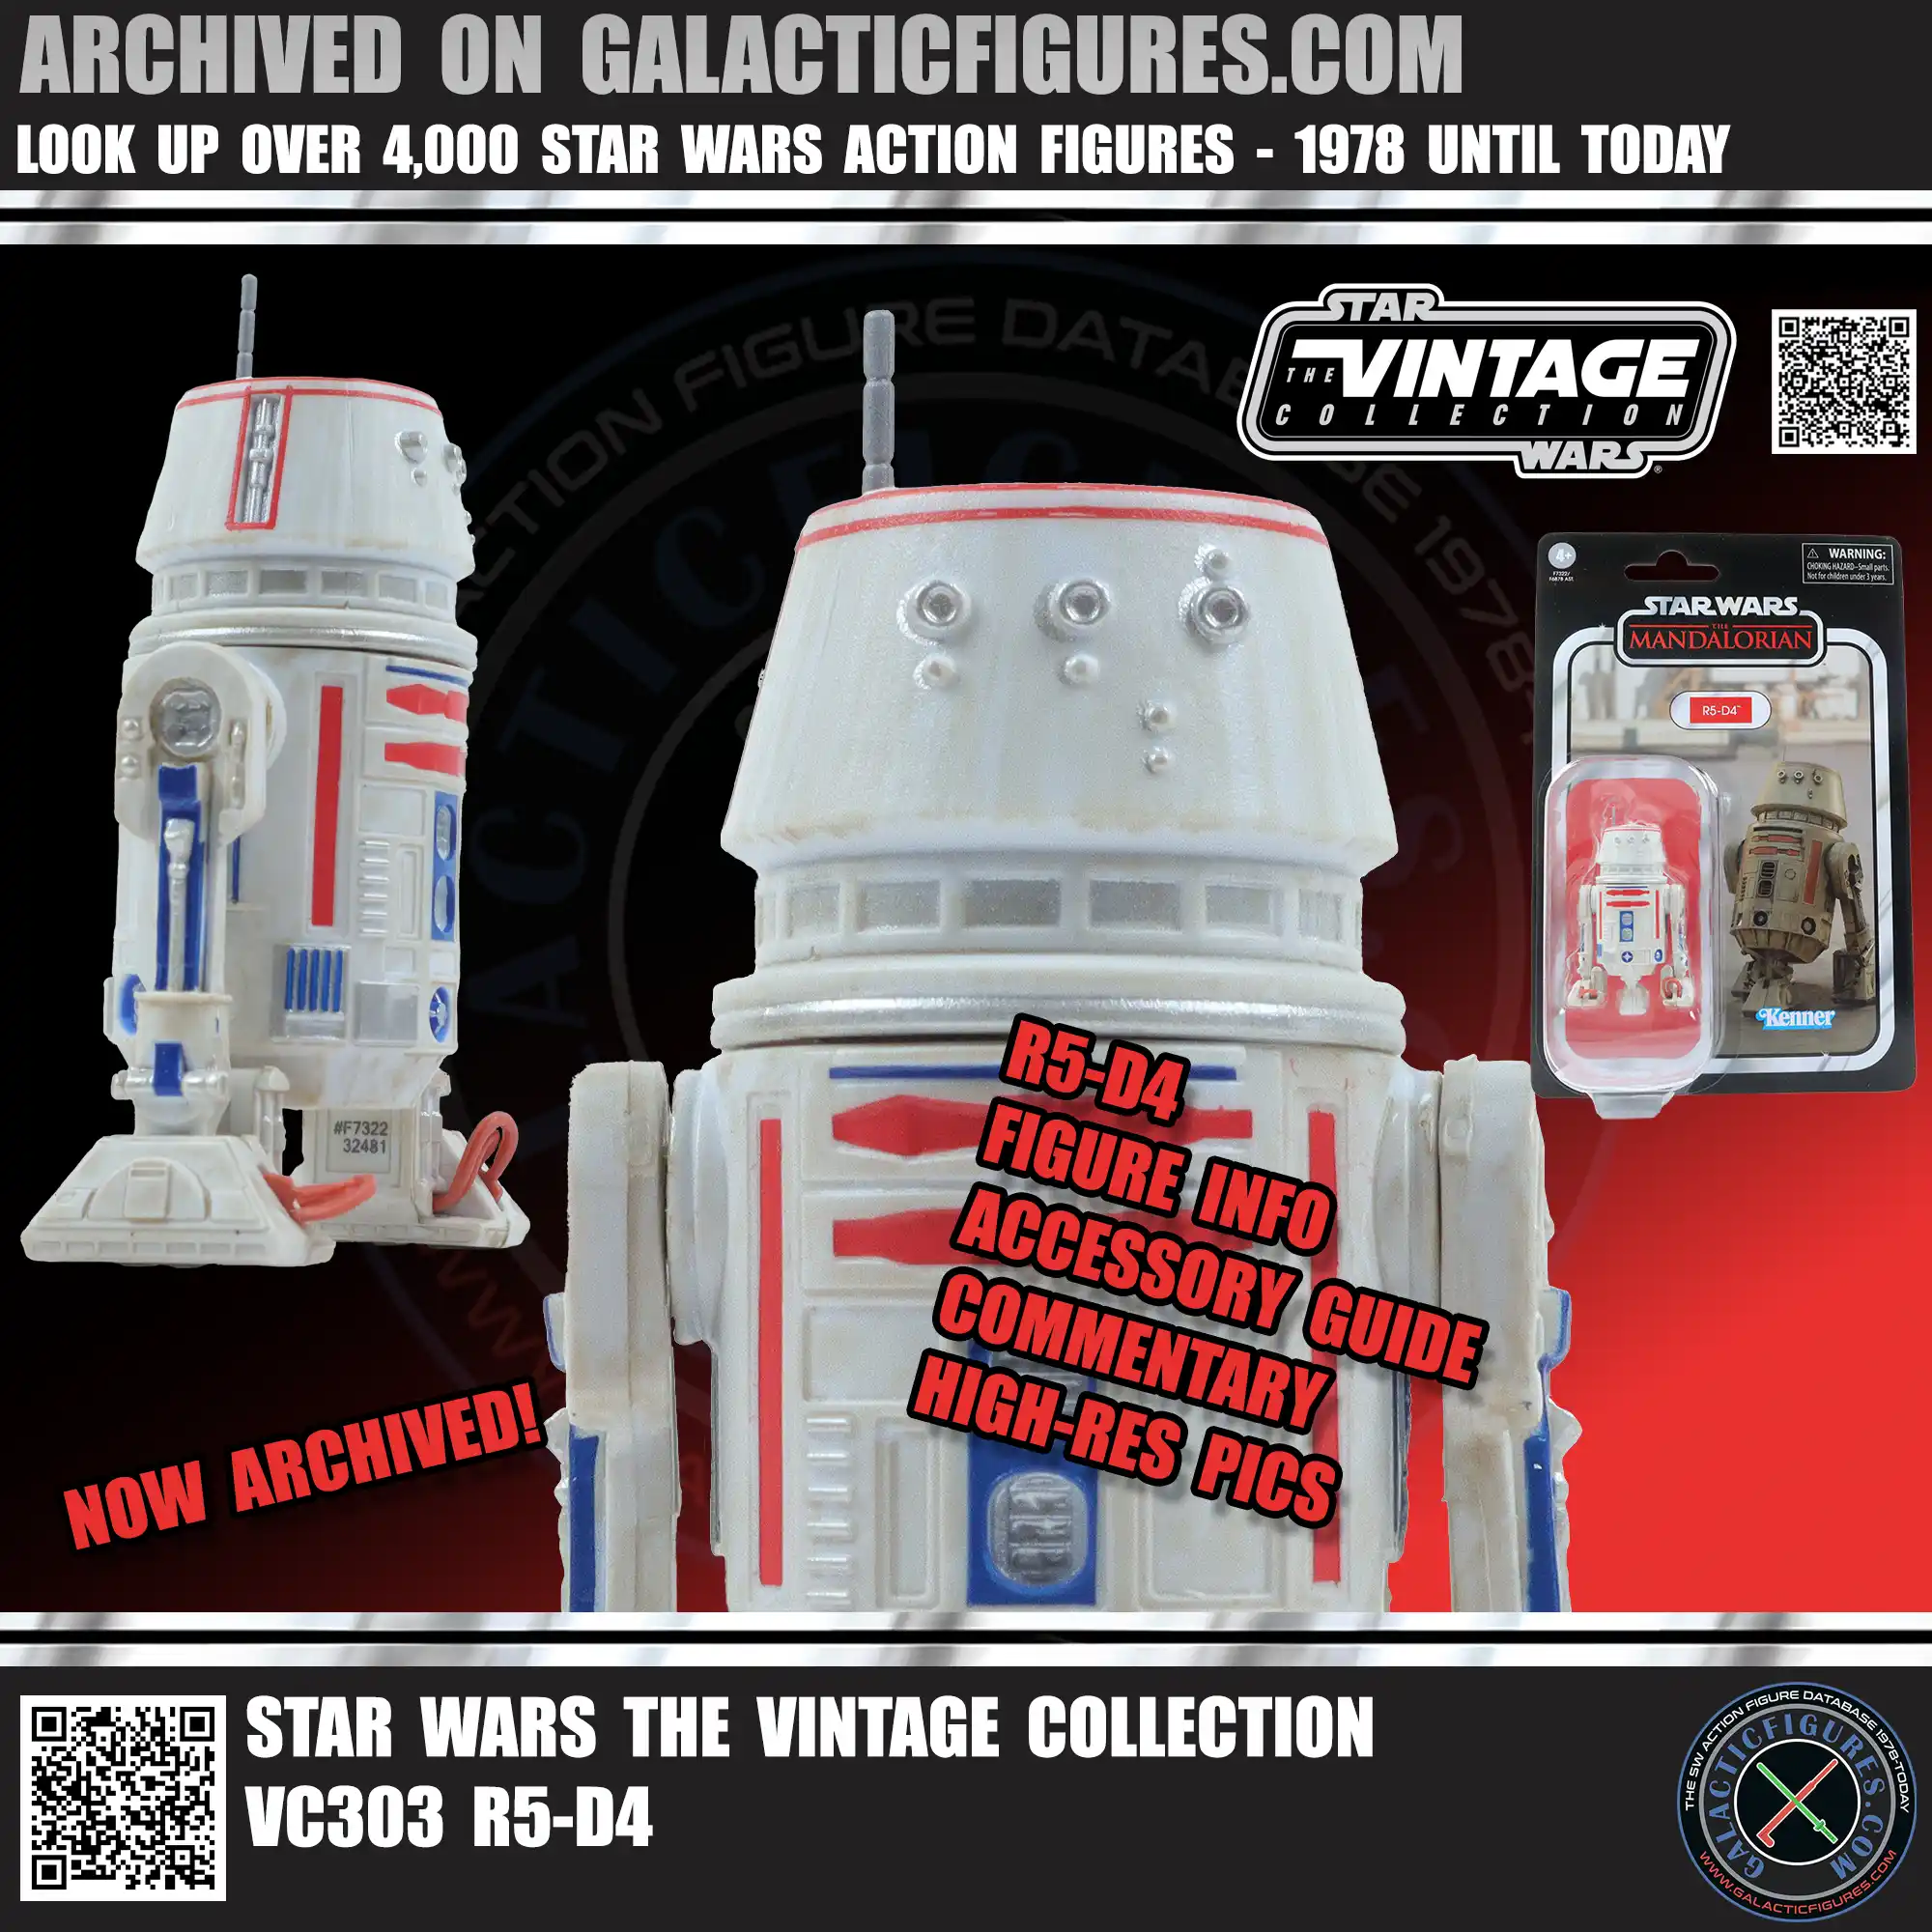 VC303 R5-D4 Archived